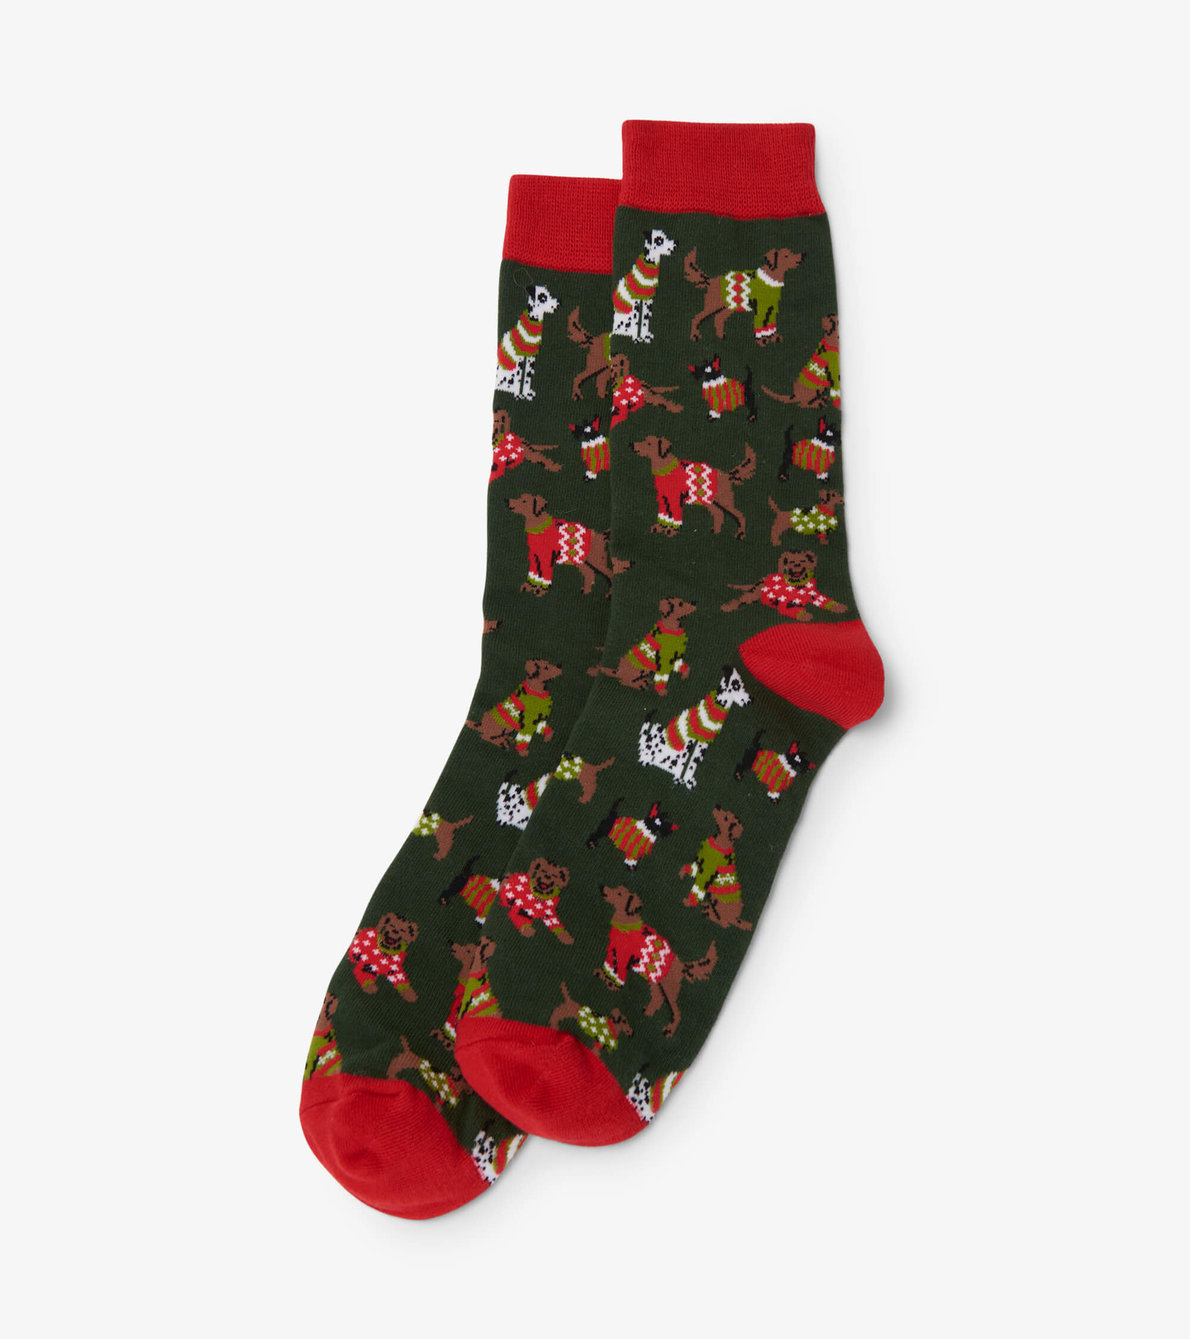 View larger image of Men's Woofing Christmas Crew Socks